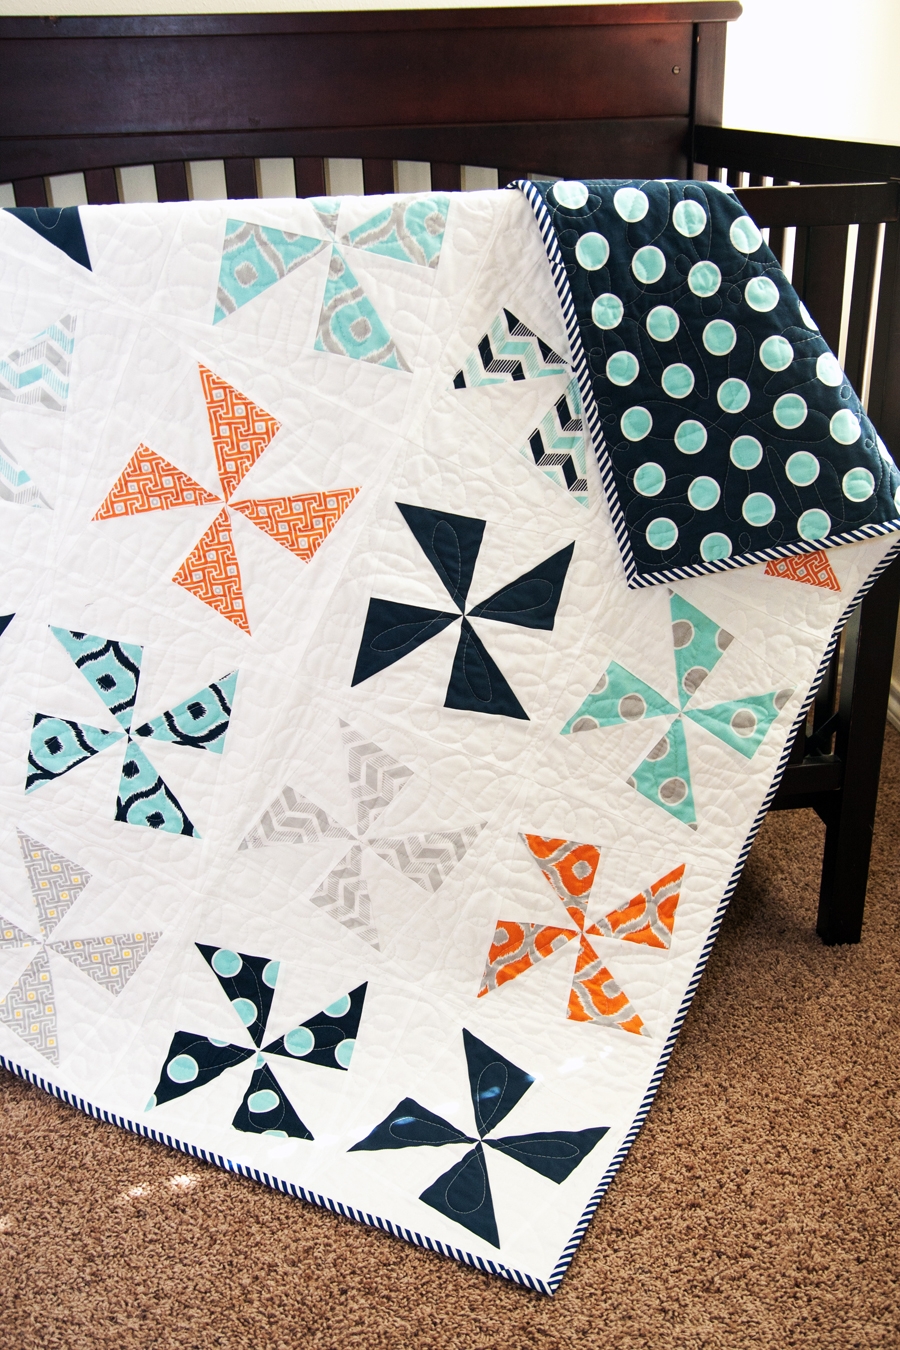 Shuffle pinwheel quilt by Vanessa Goertzen of Lella Boutique. Cool boy quilt made with charm packs or fat quarters. Fabric is Mixologie by Studio M for Moda Fabrics.